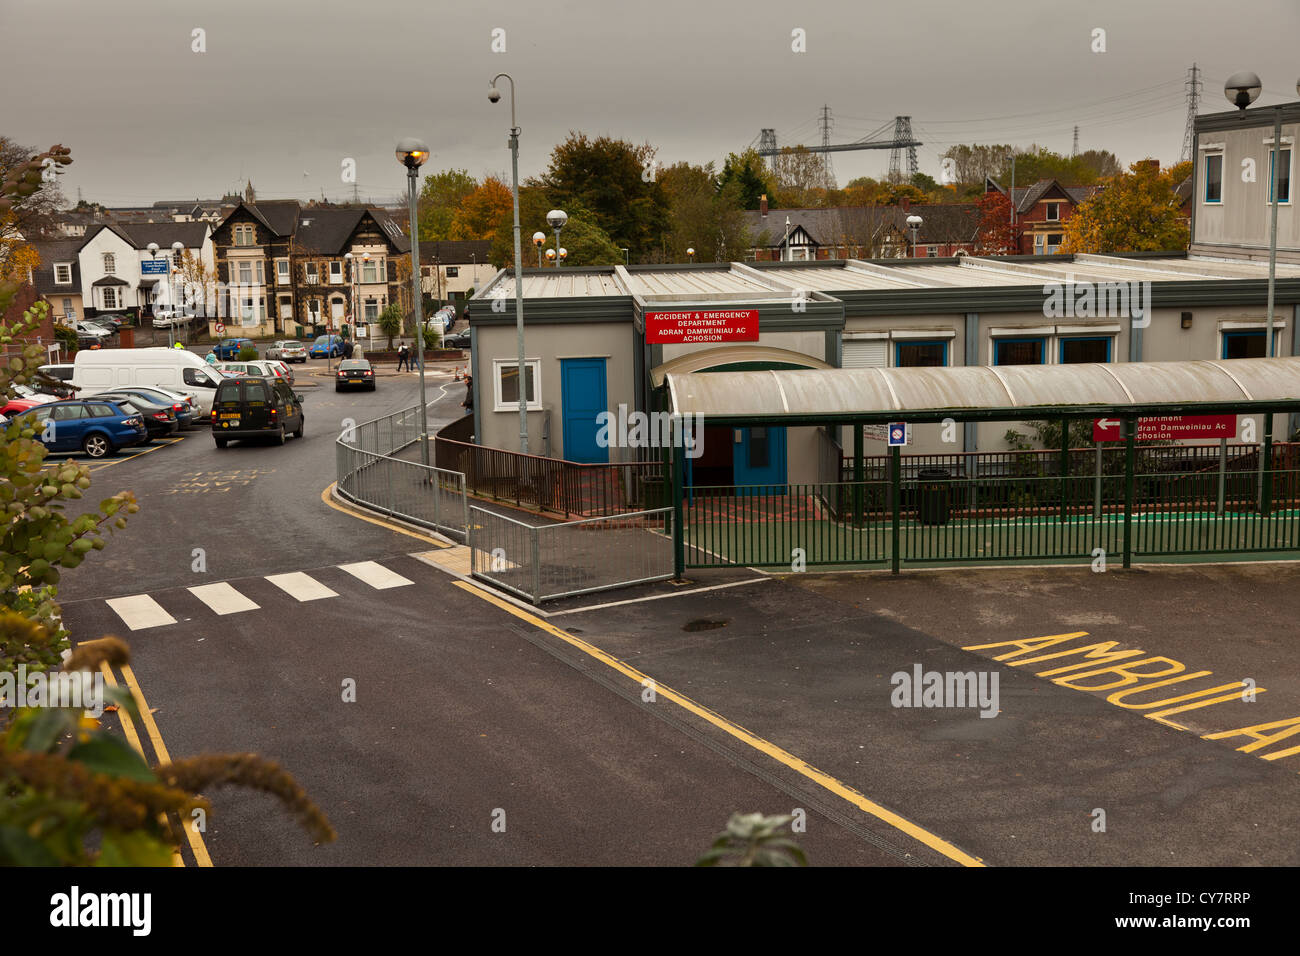 Casualty A & E departments and ambulance at The Royal Gwent Hospital Newport Wales UK. Stock Photo